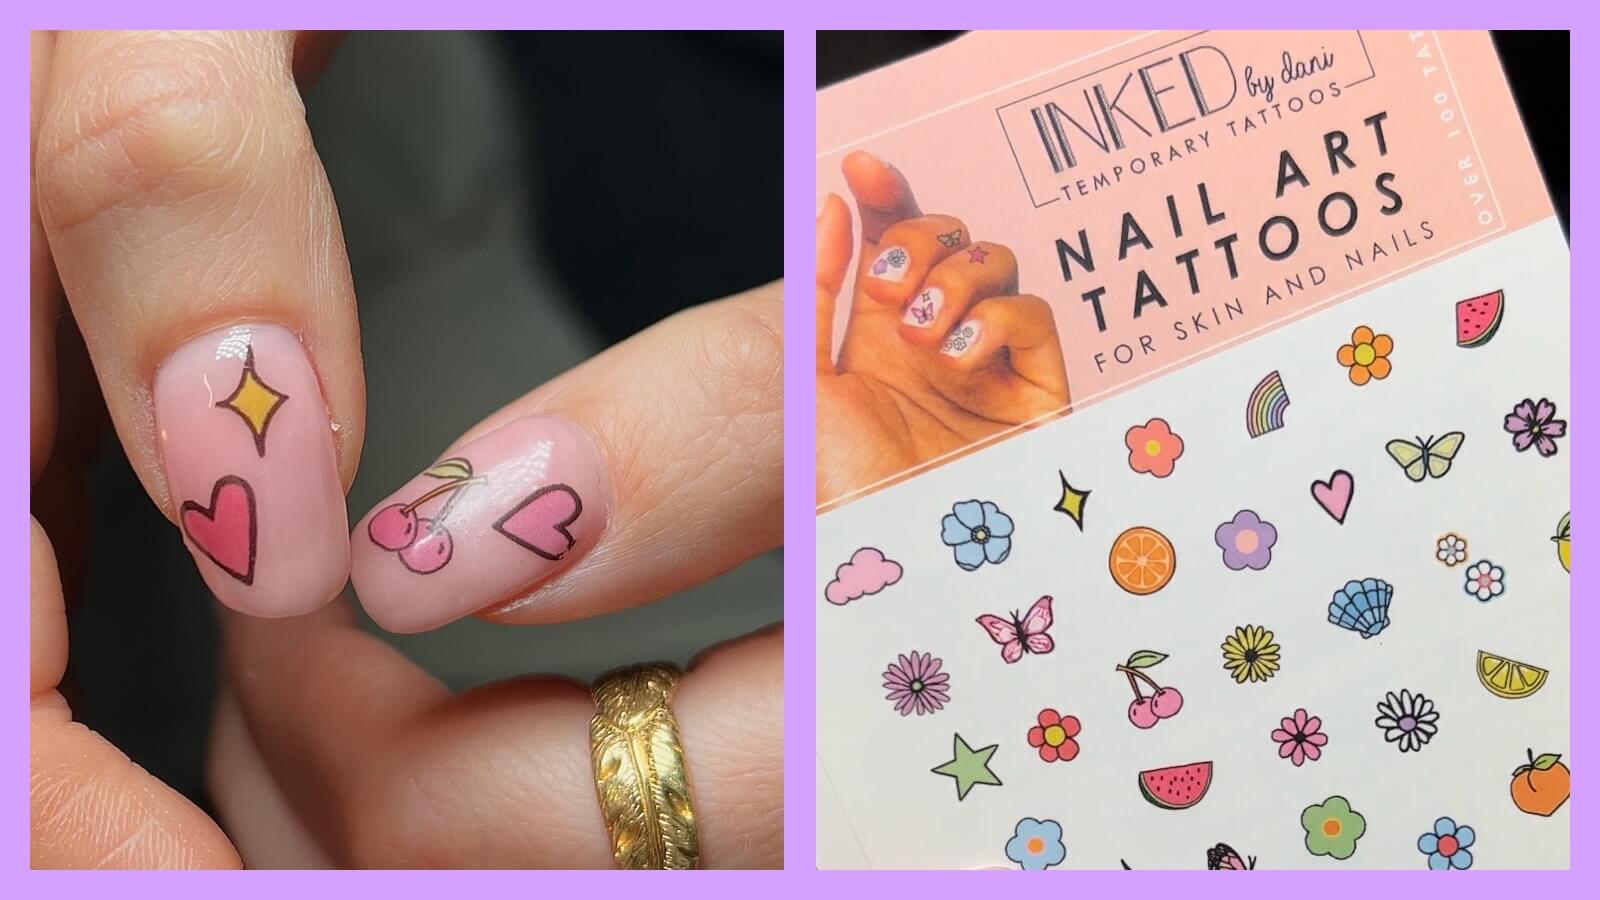 How to do nail art at home - Quora